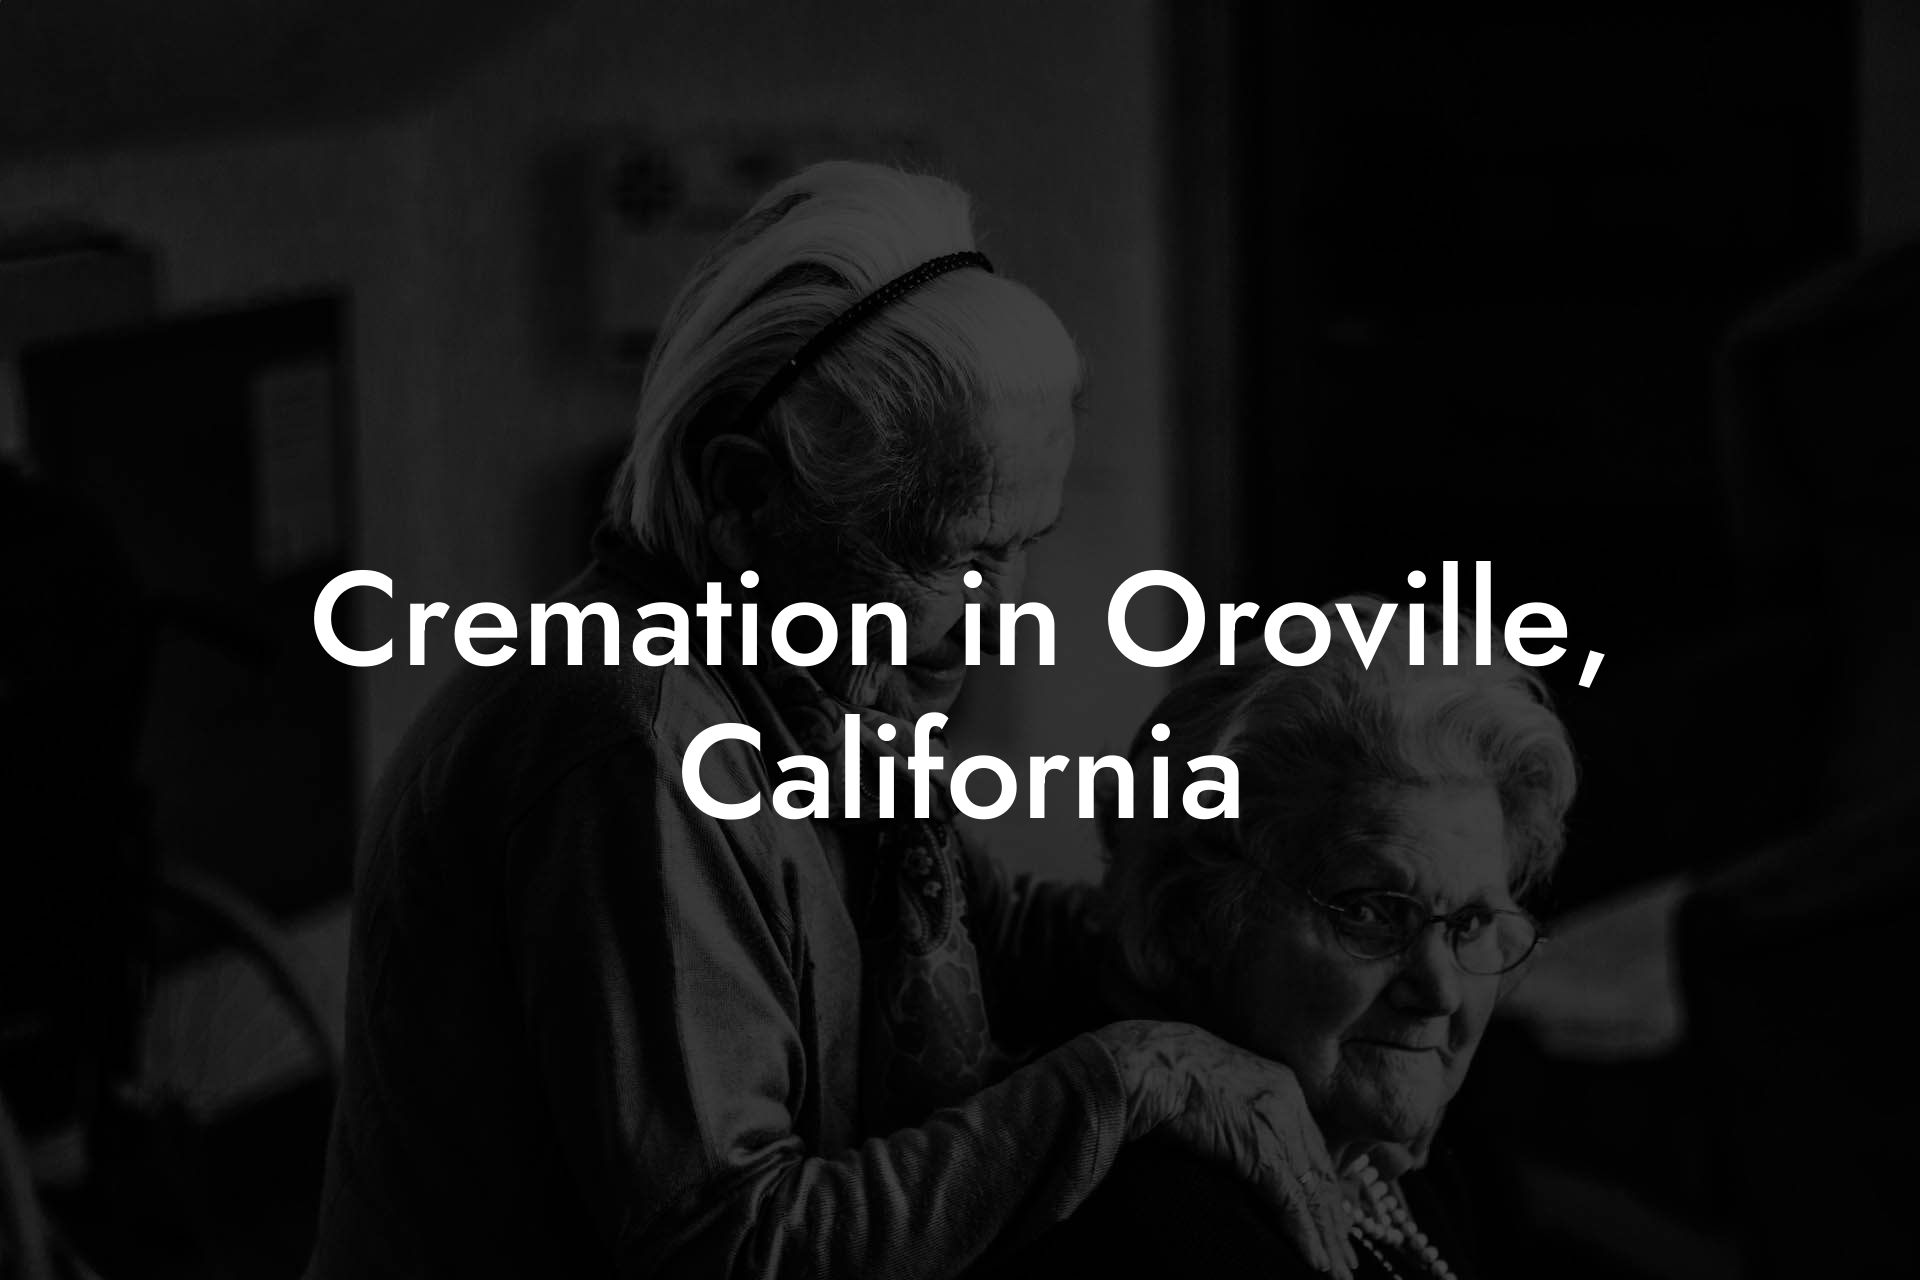 Cremation in Oroville, California